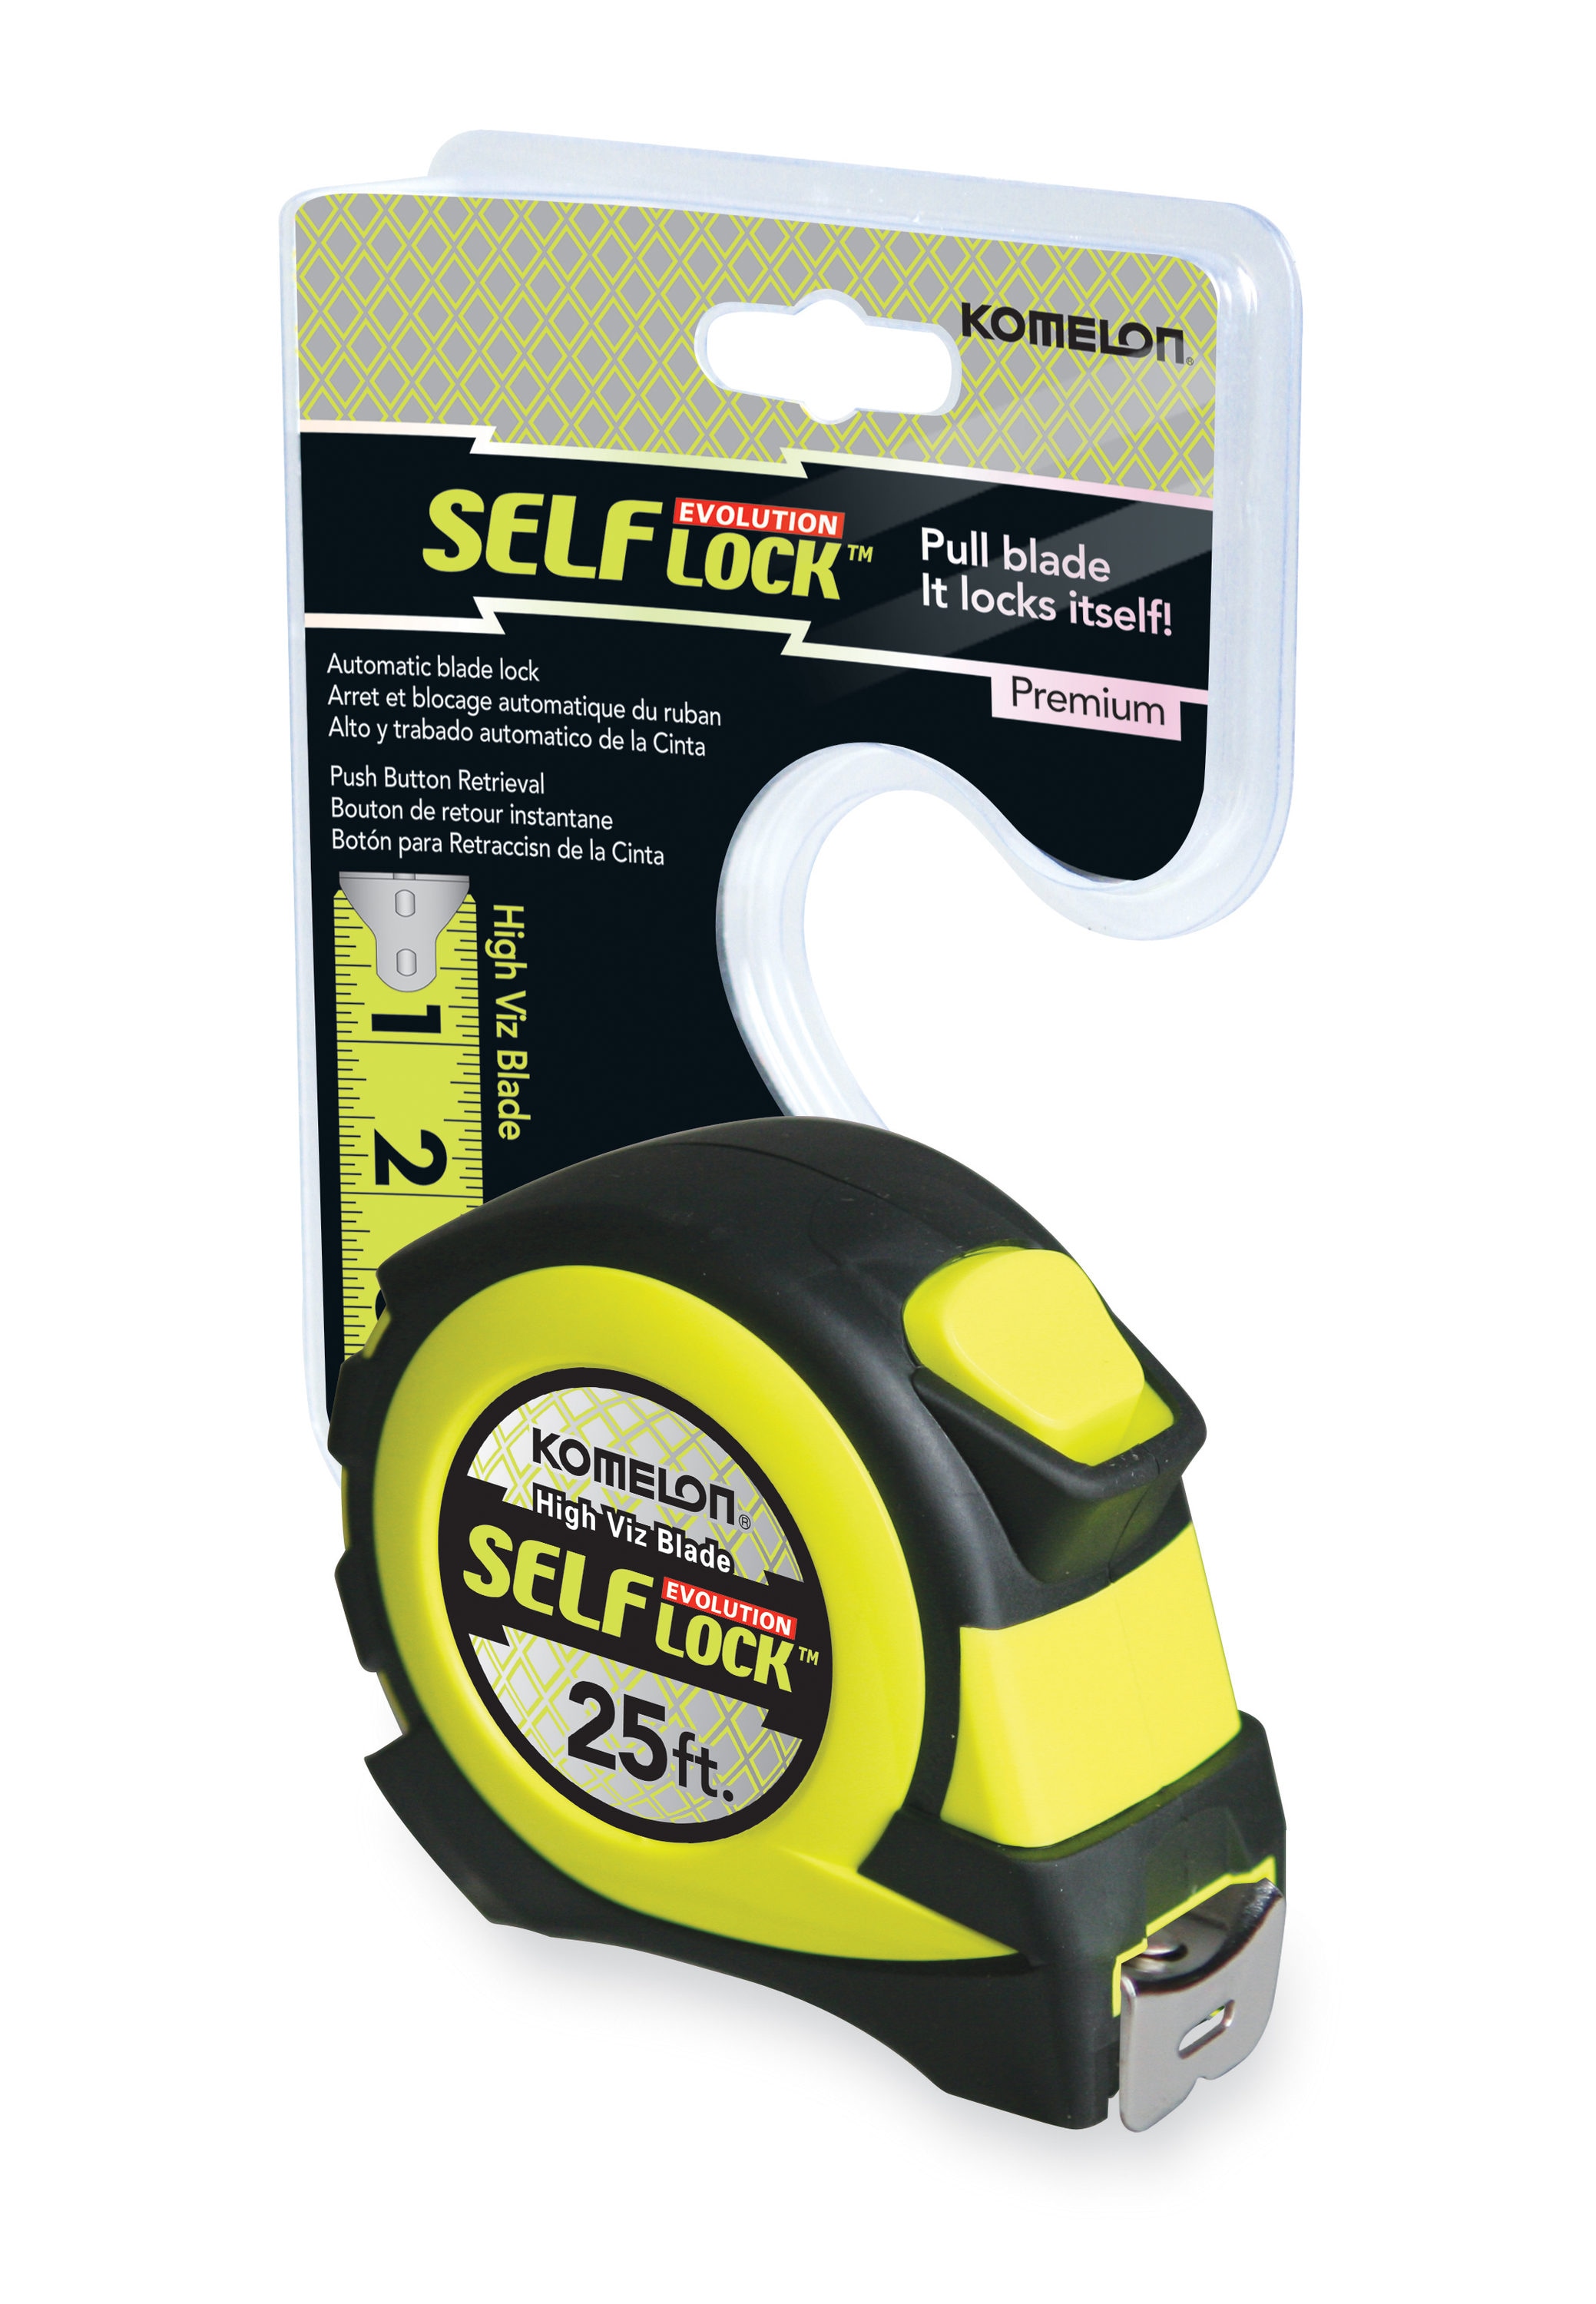 Tape Measures for sale in Chicago, Illinois